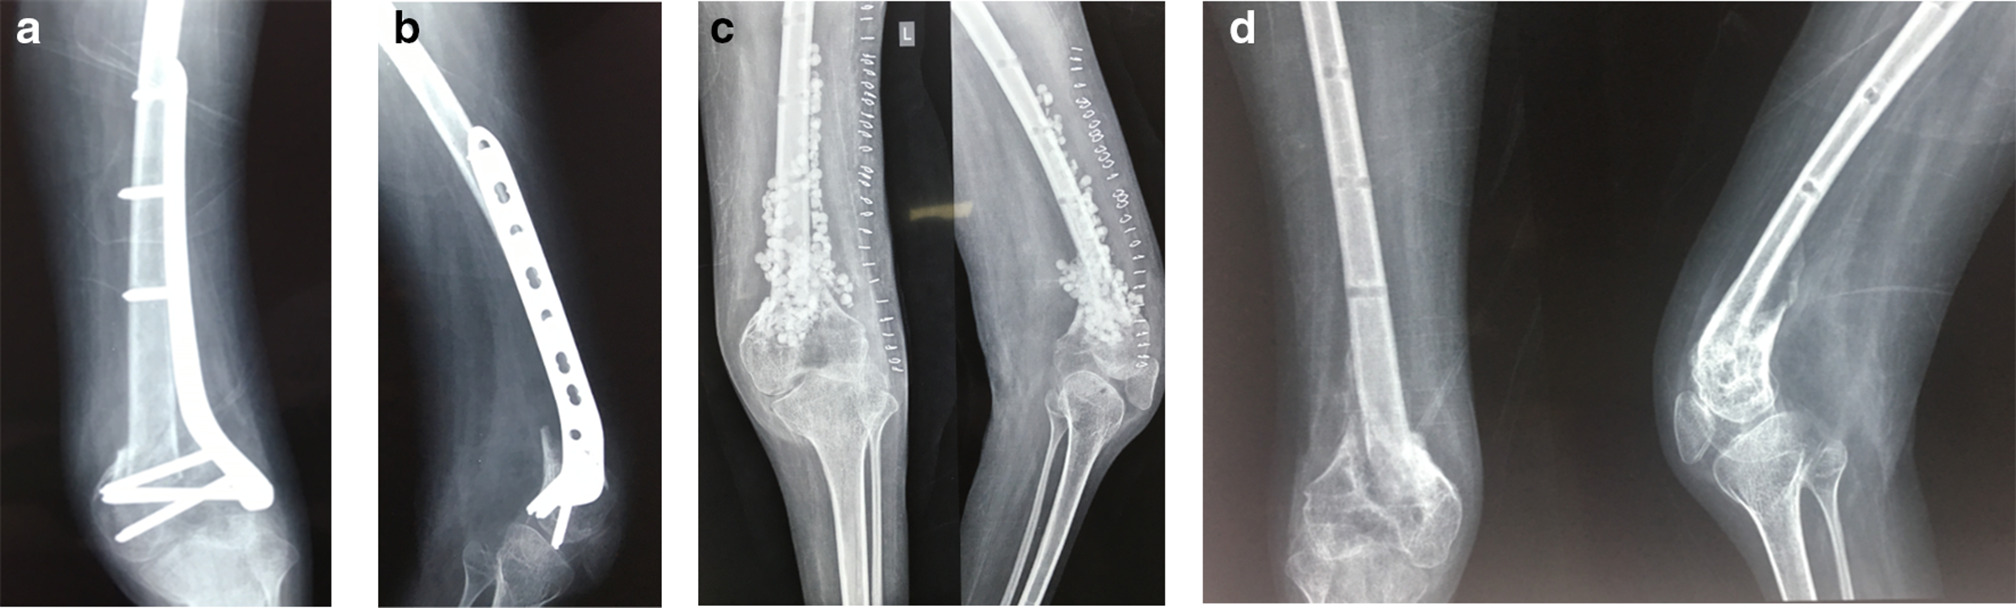 Fig. 2 
            a) 29-year-old male with post-polio residual paralysis and type 1 open fracture. Following debridement and ORIF with reversed proximal tibial plate (to match the hypoplastic bone). Presented a year later with pseudomonas infection following closed injury and haematoma formation. b) Lateral view of distal femur with knee, demonstrating the distal femoral fracture and plate fixation. c) Anteroposterior (AP) and lateral views of distal femur with knee, following wound debridement, implant removal, and Stimulan insertion. d) AP and lateral views of distal femur with knee demonstrating good healing of distal femoral fracture at six months' follow-up.
          